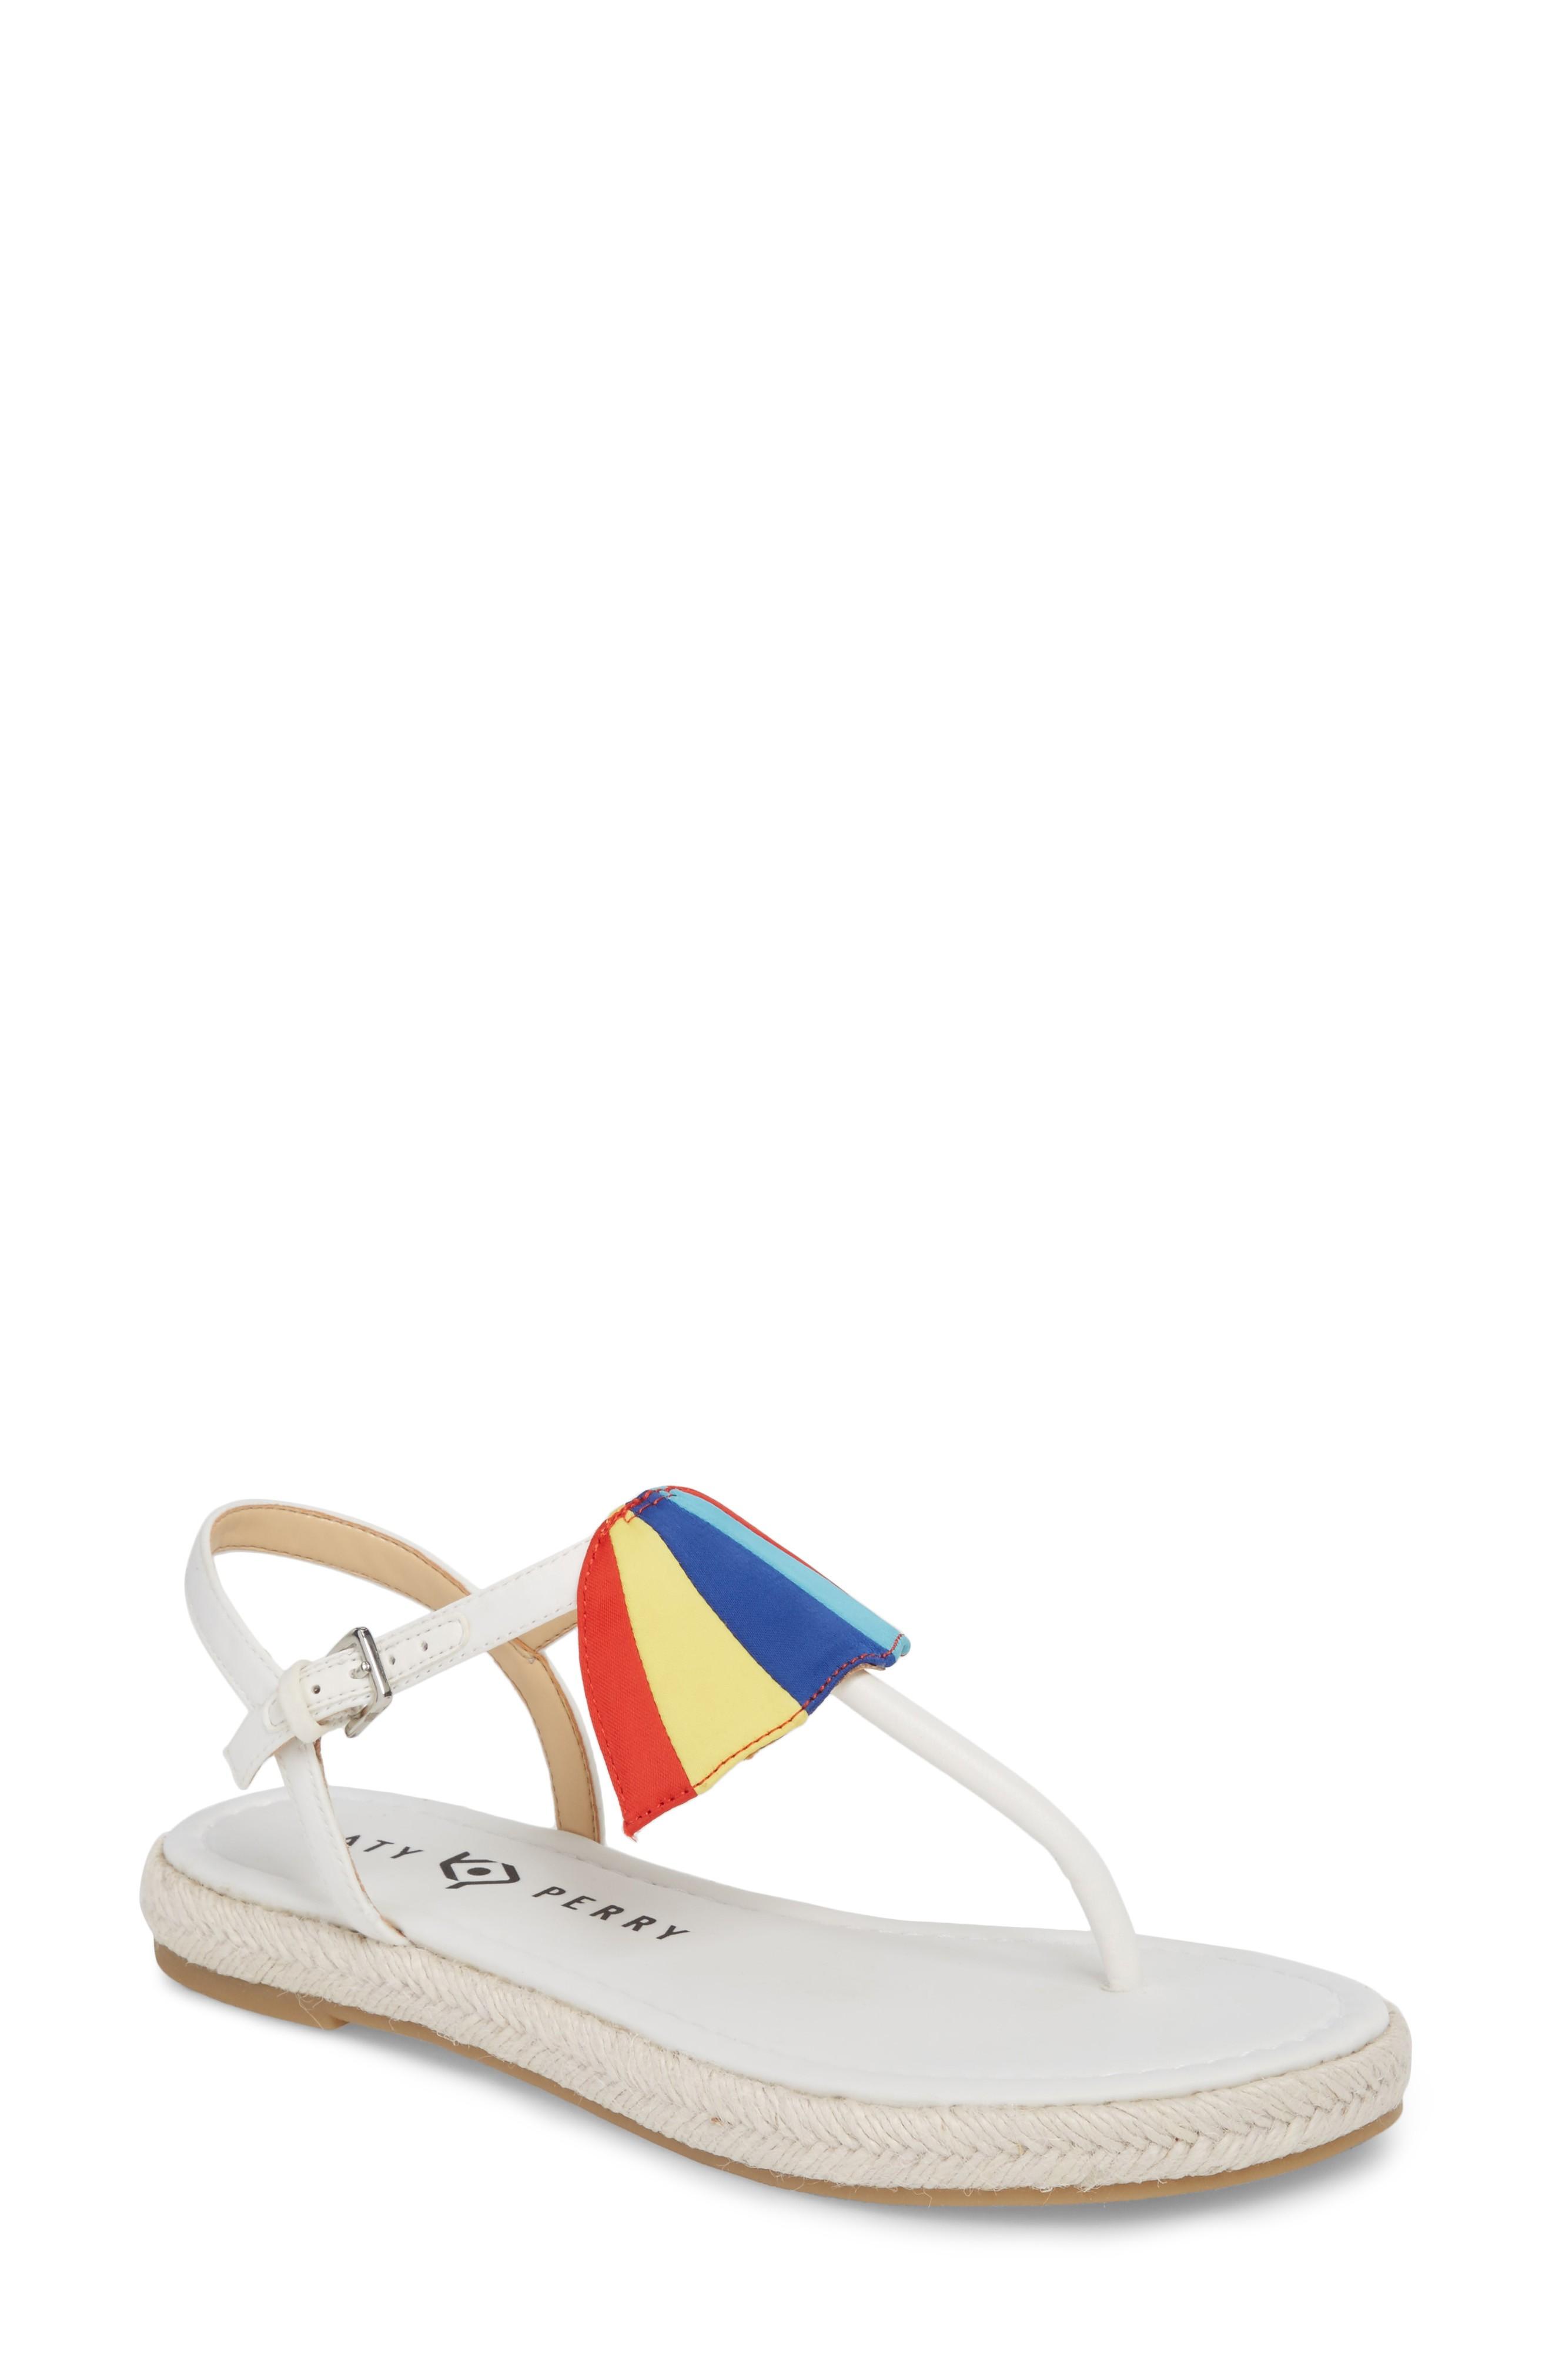 Katy Perry The Shay Espadrille Sandal In White Fabric | ModeSens